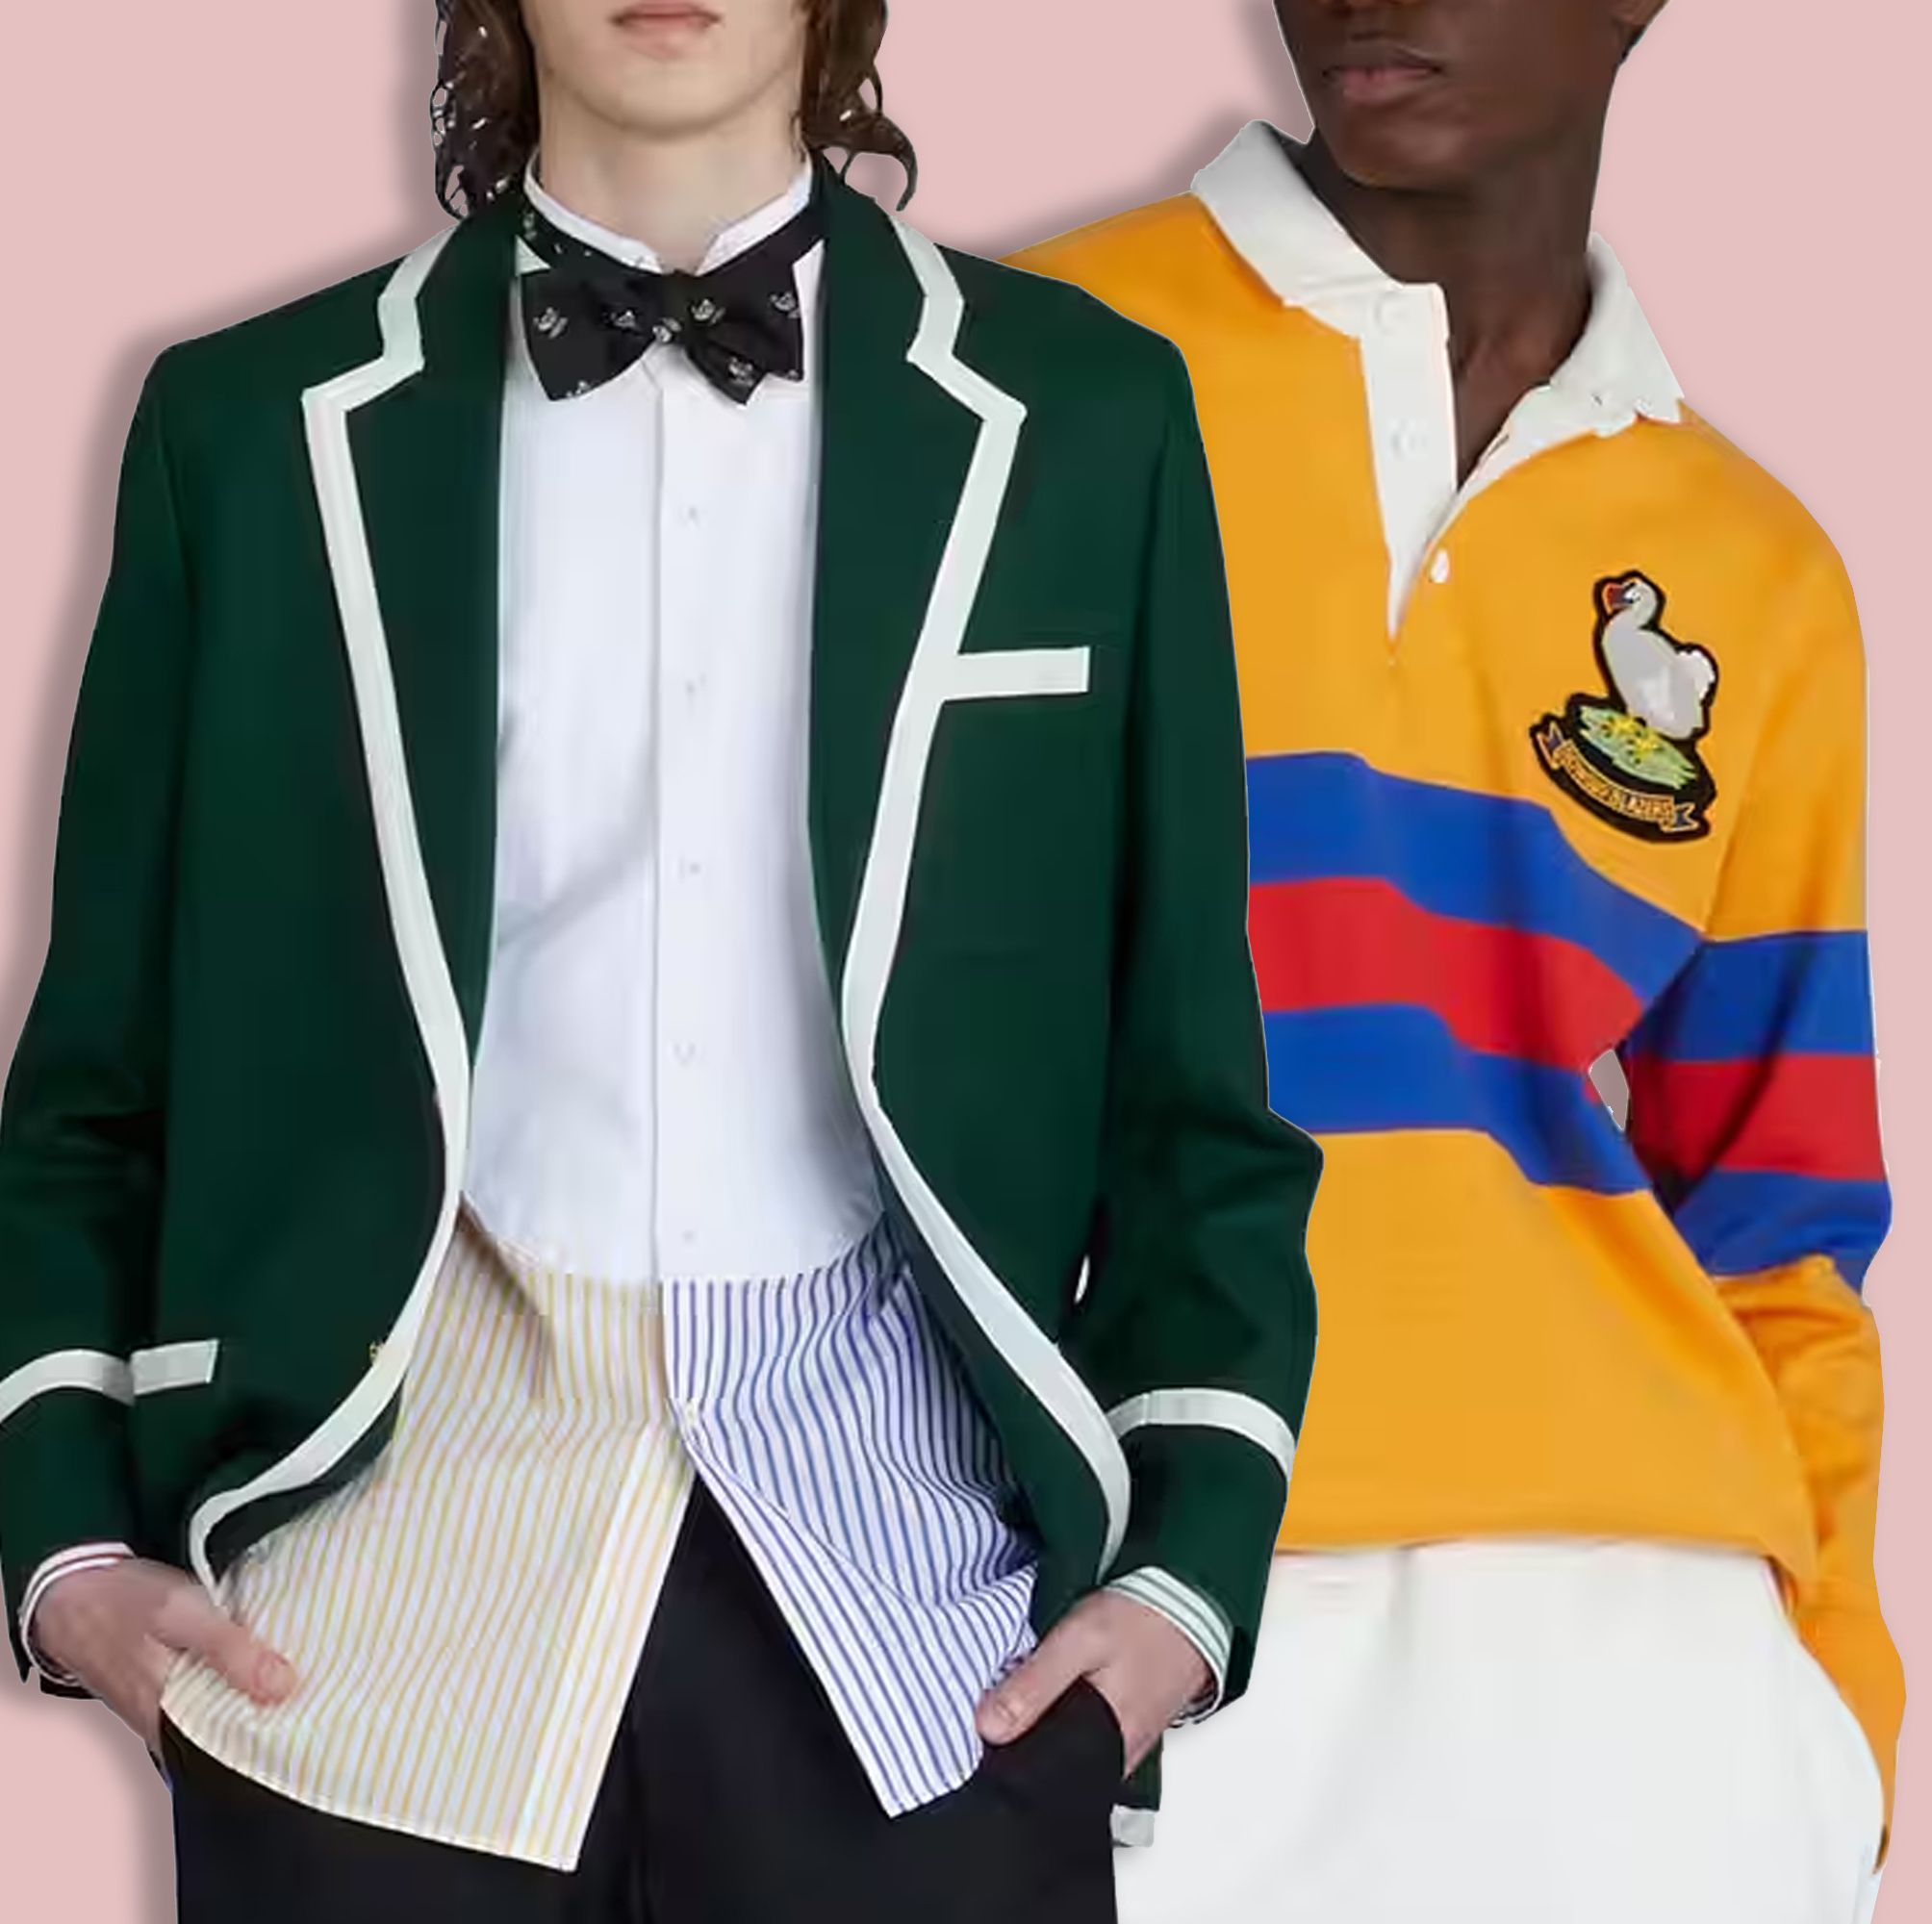 Rowing Blazers x Gucci Vault Is the Funky-Preppy Collab This Summer Needs